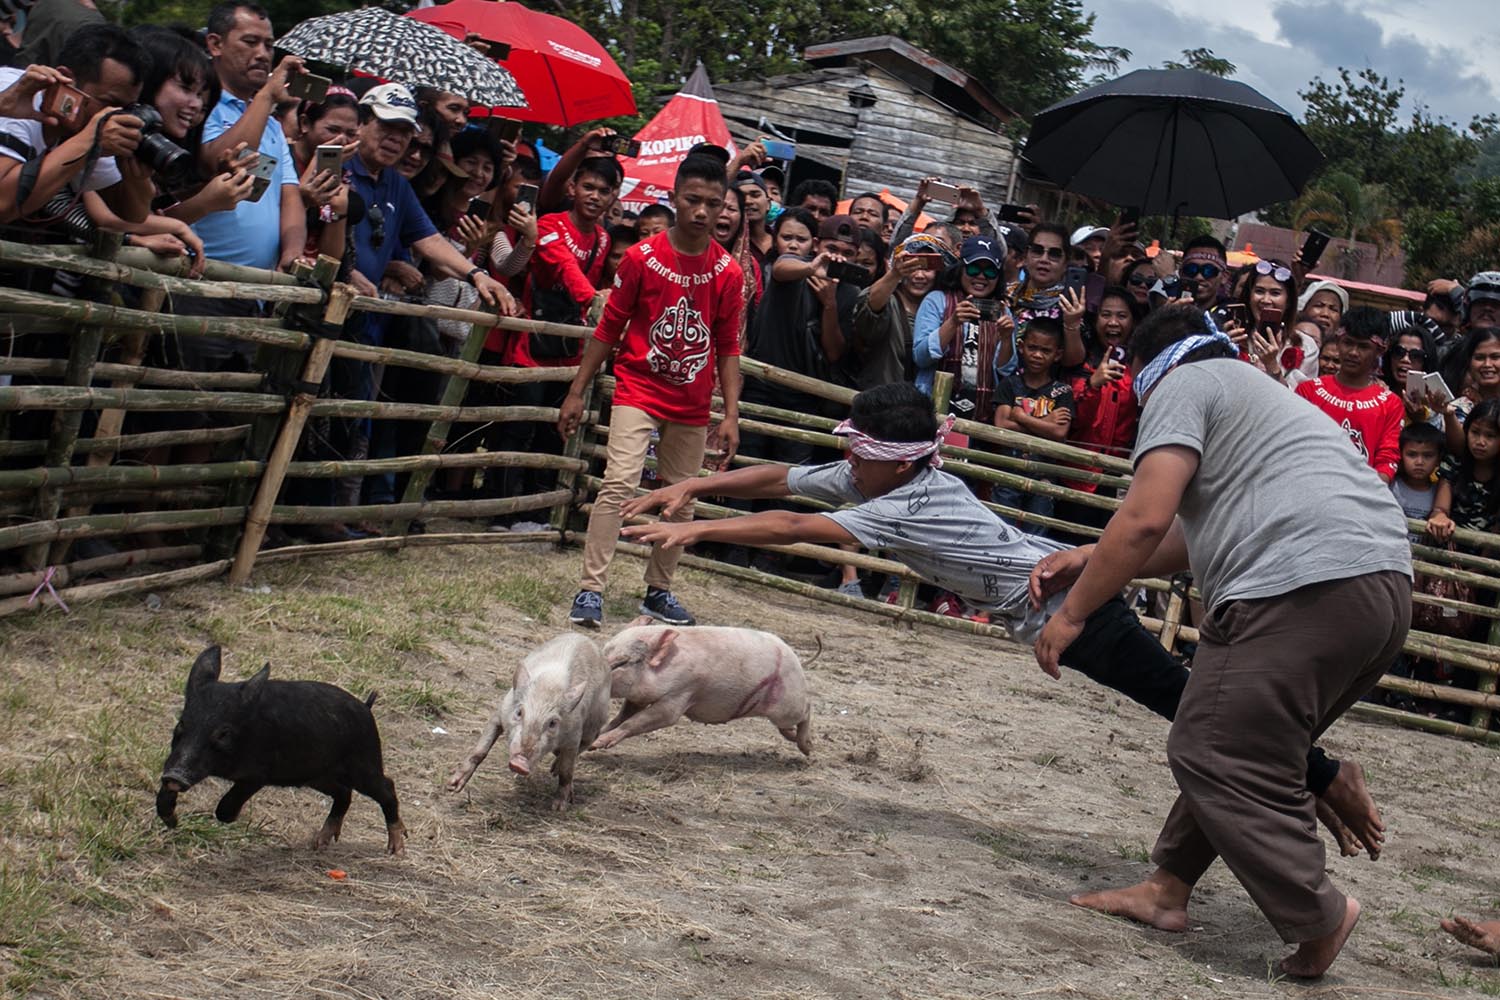 Got ‘em!: Blindfolded competitors try to catch pigs. JP/Andri Ginting